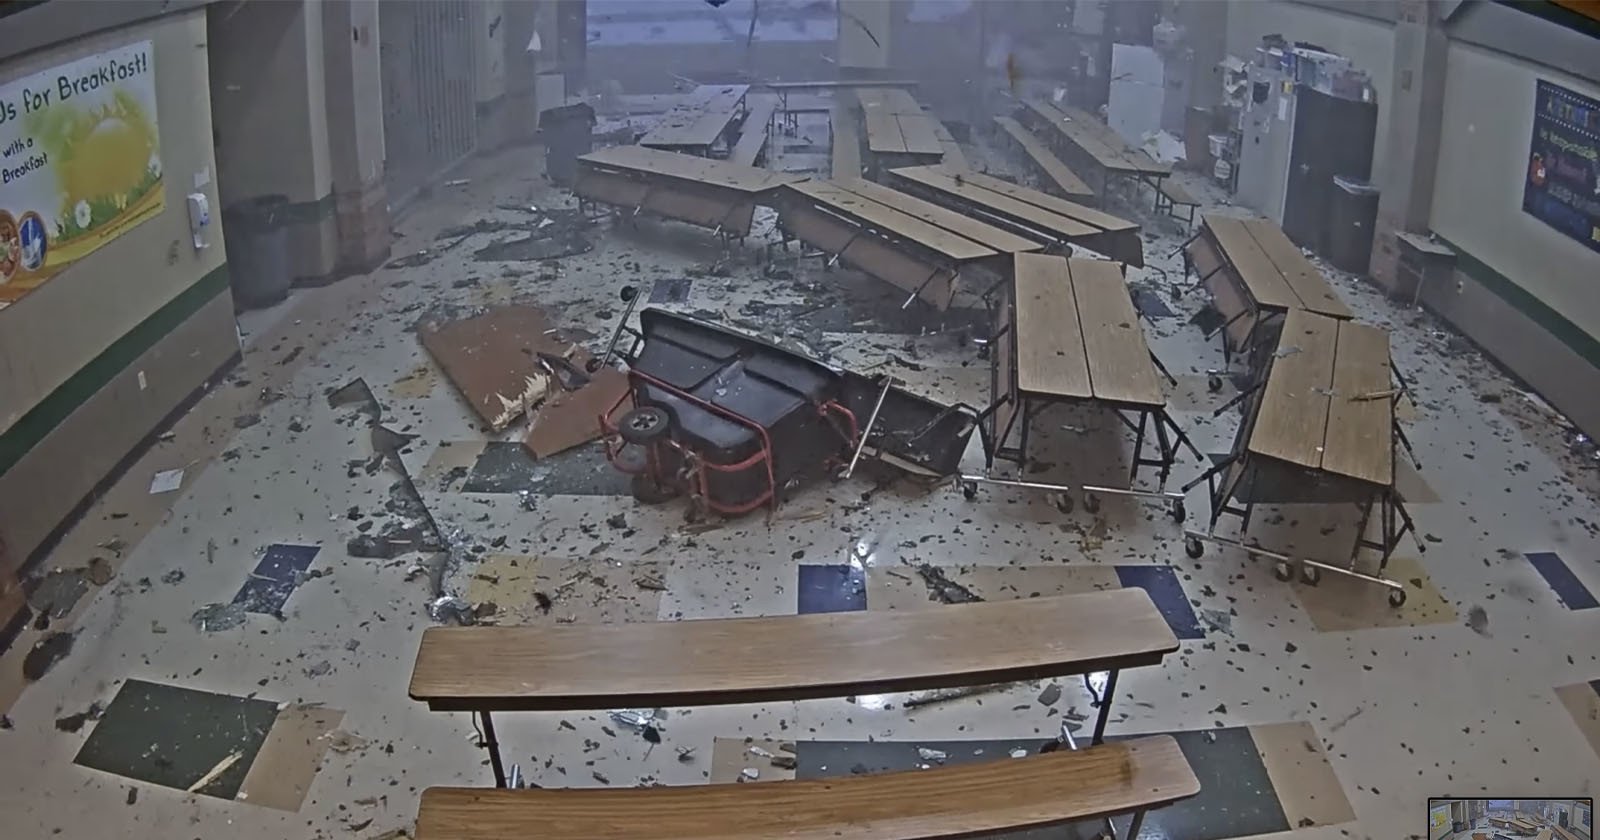 The Fury of a Tornado Captured by a Schools Security Cameras